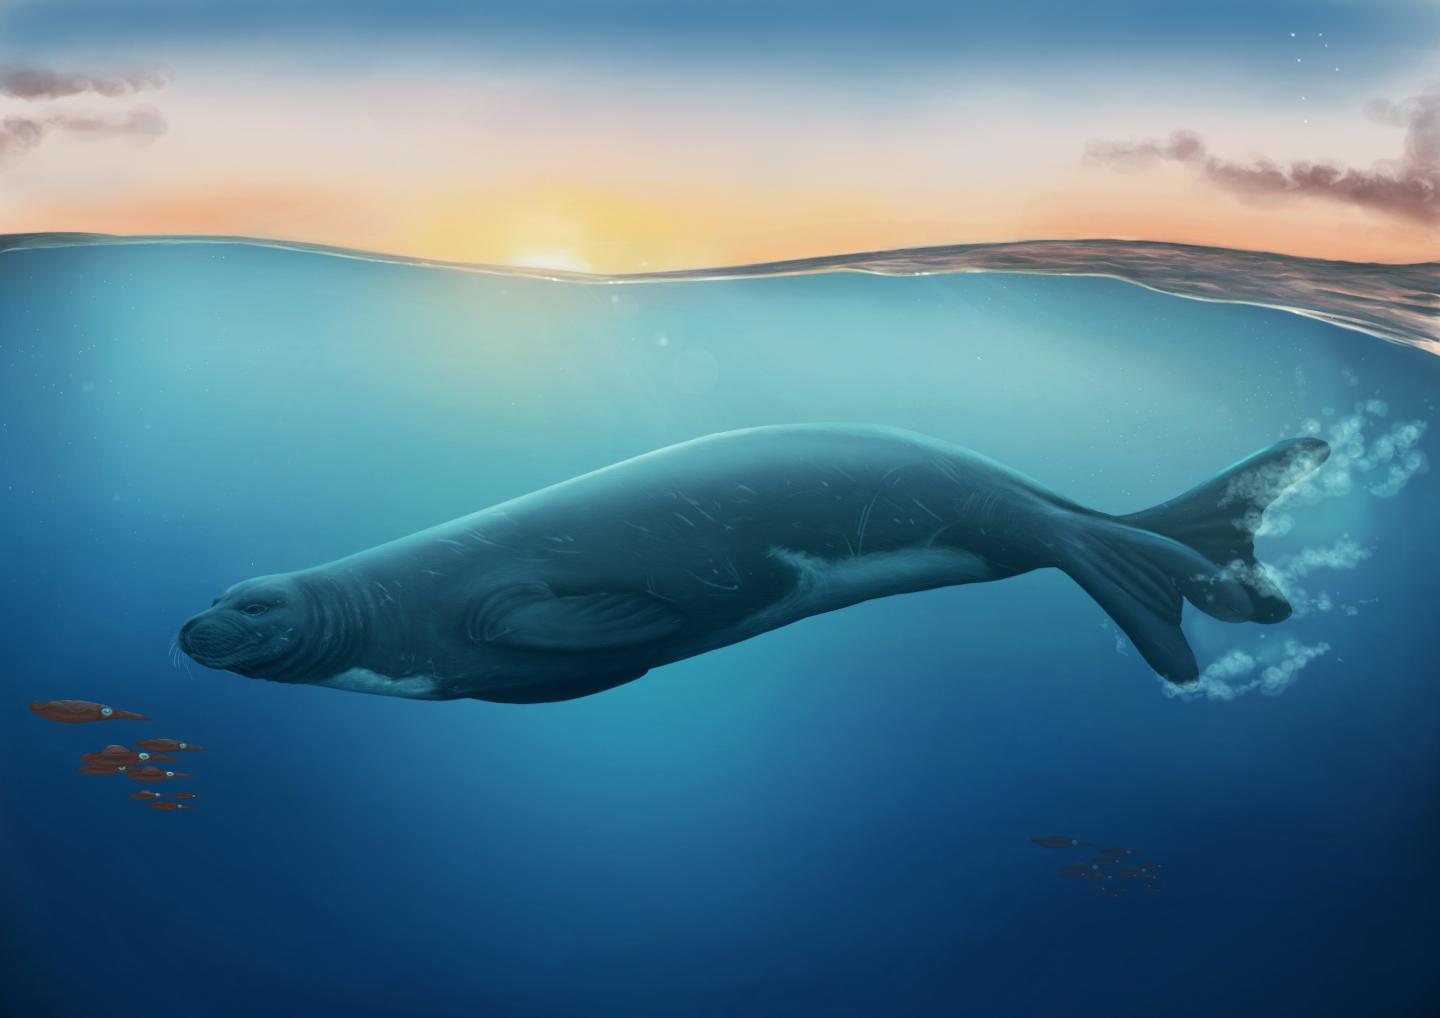 An artist impression of the newly discovered extinct monk seal species